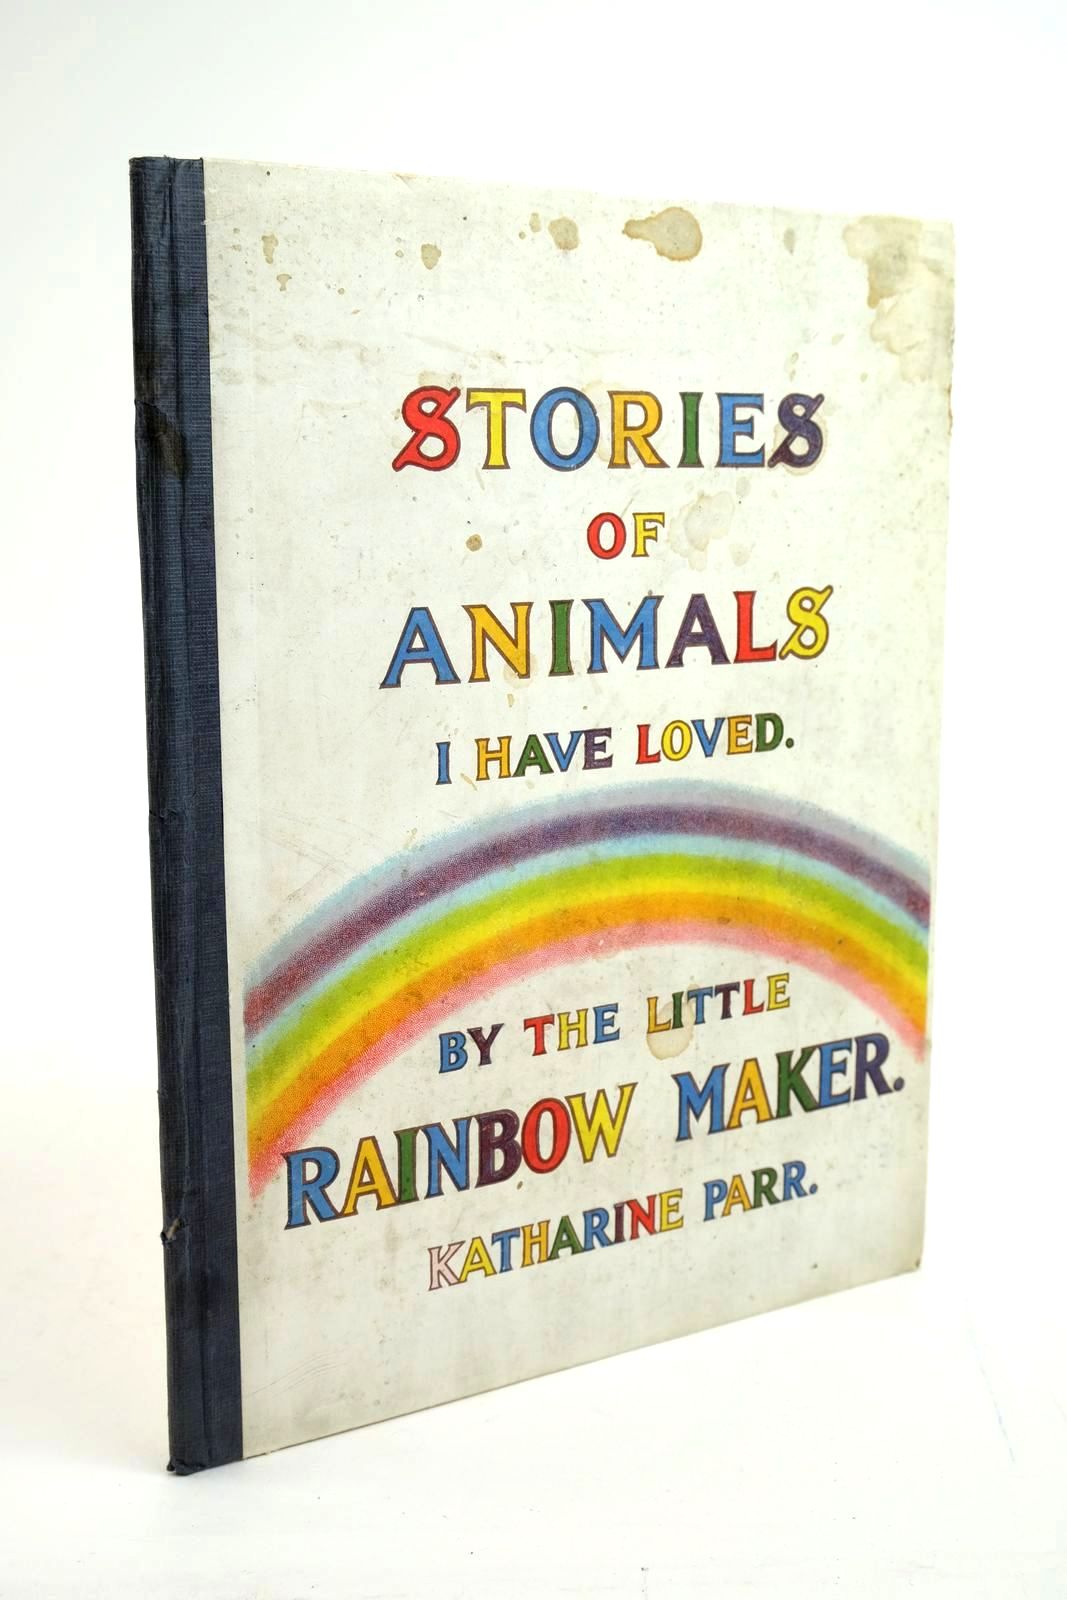 Photo of STORIES OF ANIMALS I HAVE LOVED BYT HE LITTLE RAINBOW MAKER written by Parr, Katherine published by Katharine Parr (STOCK CODE: 1321536)  for sale by Stella & Rose's Books